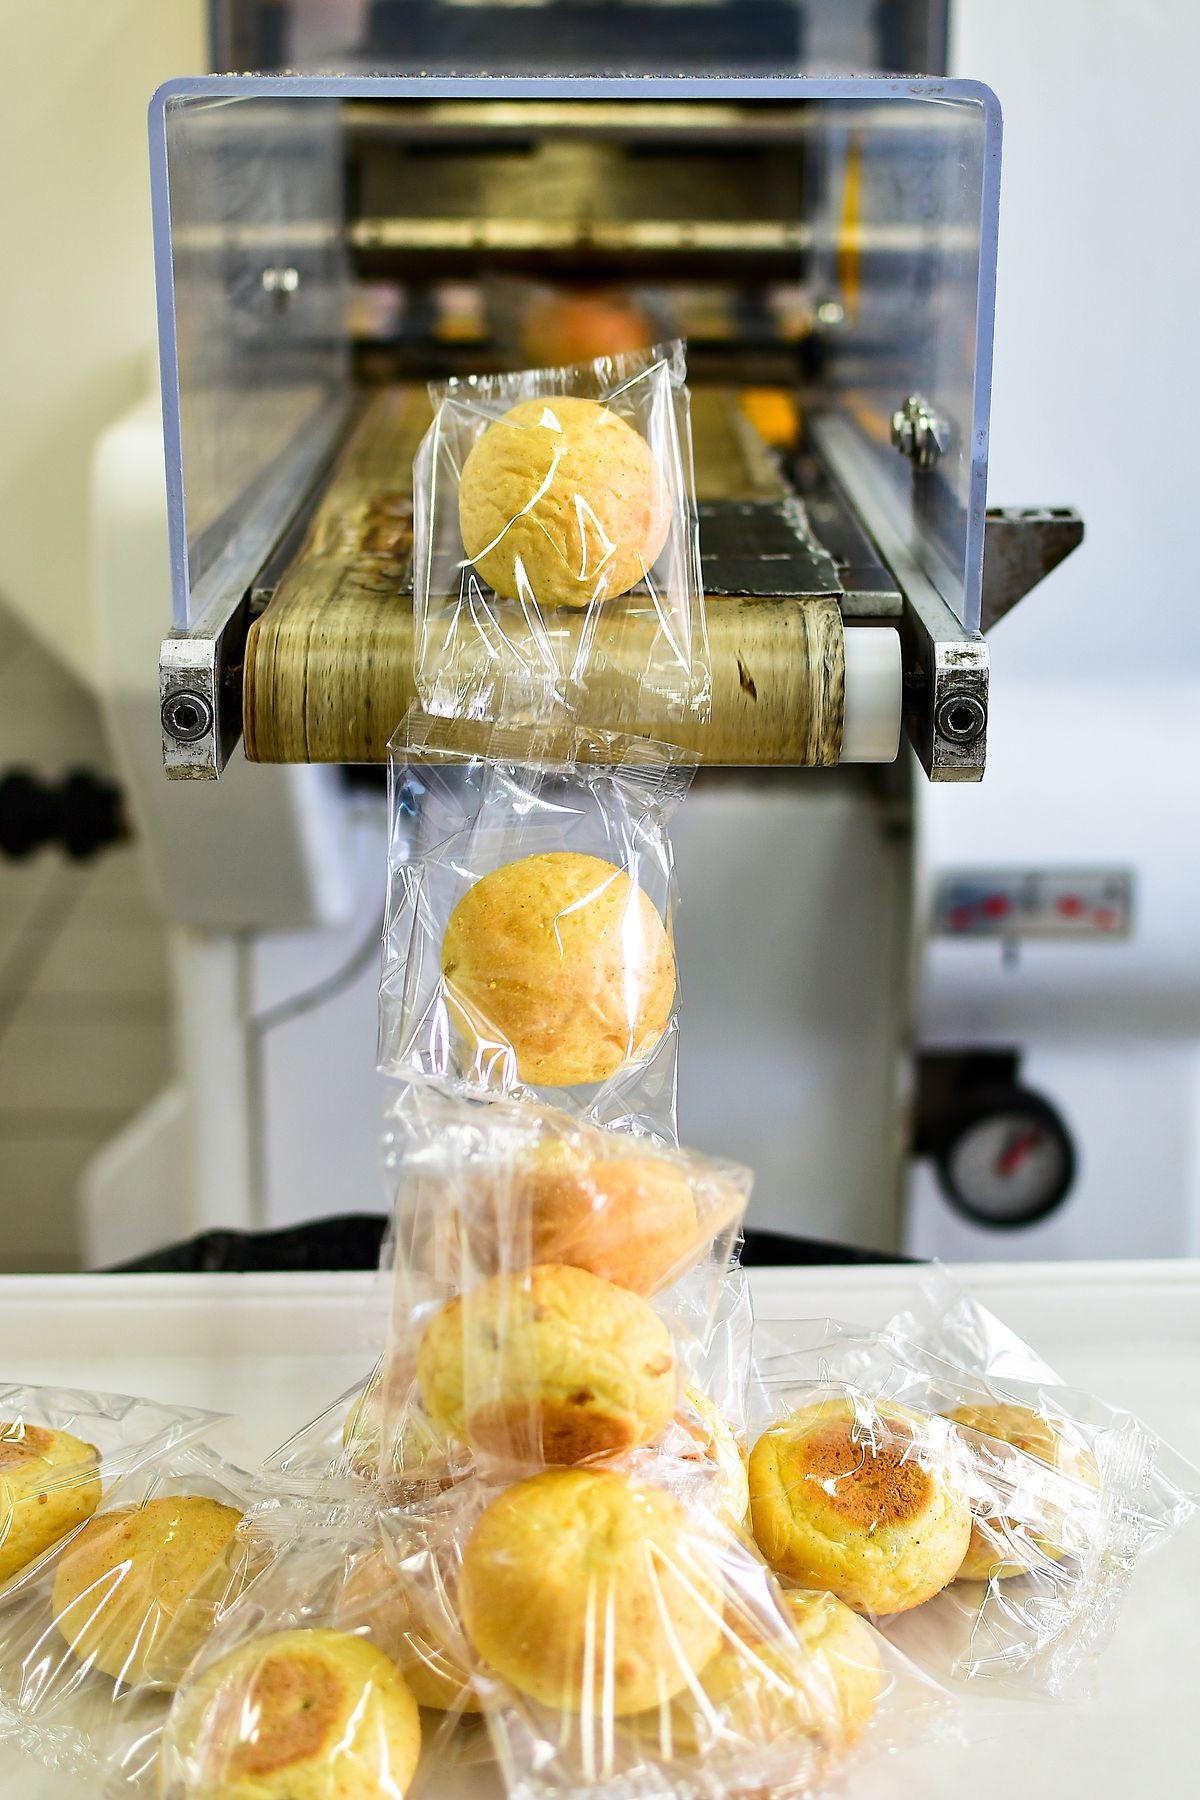 Small round buns are Packed in transparent plastic packaging. Bread production and packaging